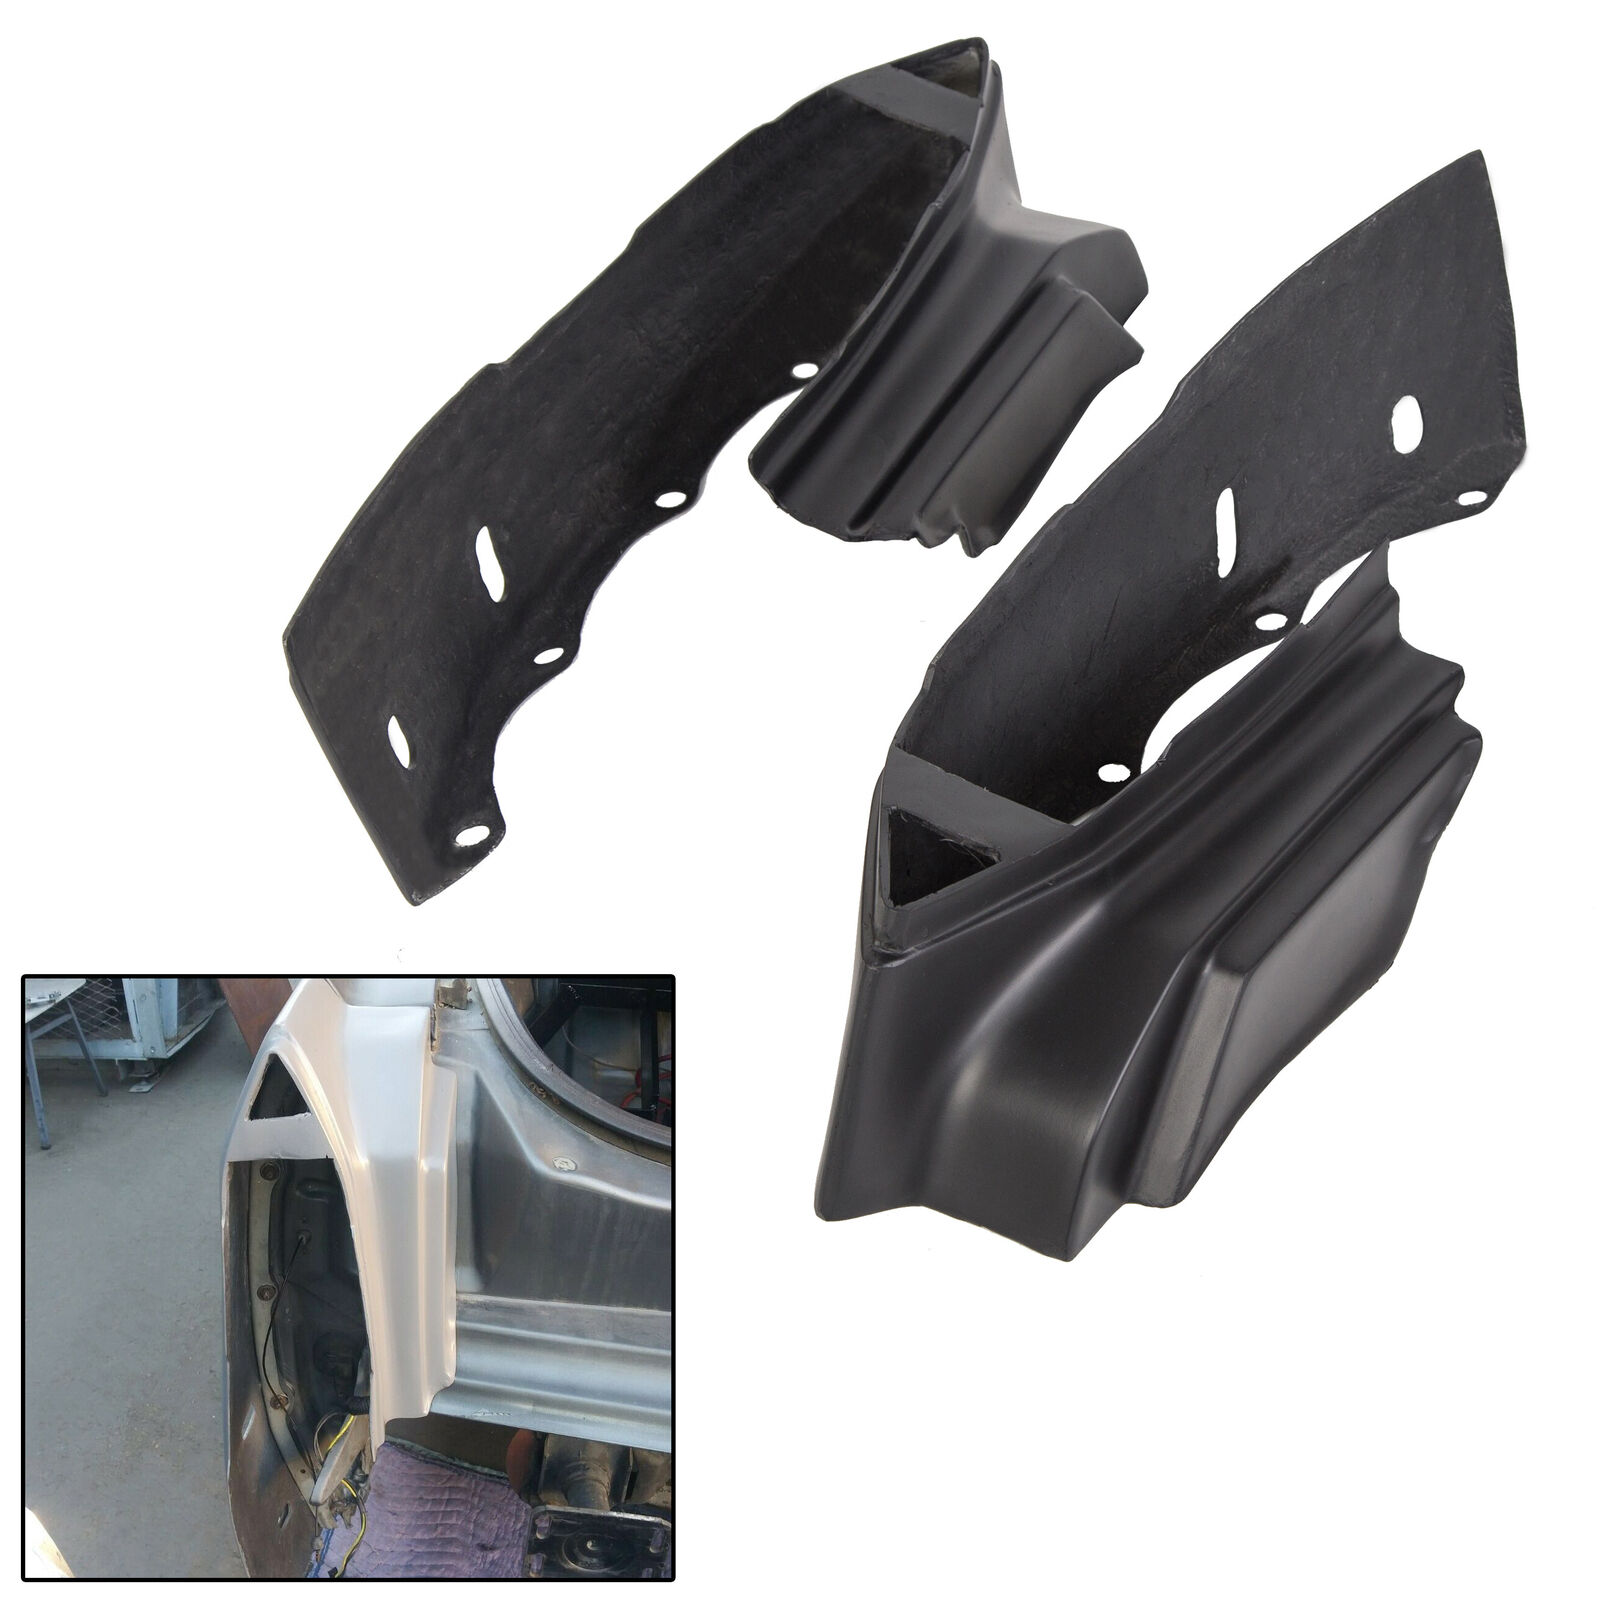 Rear Bumper Fillers For 1990 1991 1992 Cadillac Fleetwood Brougham Coupe Deville